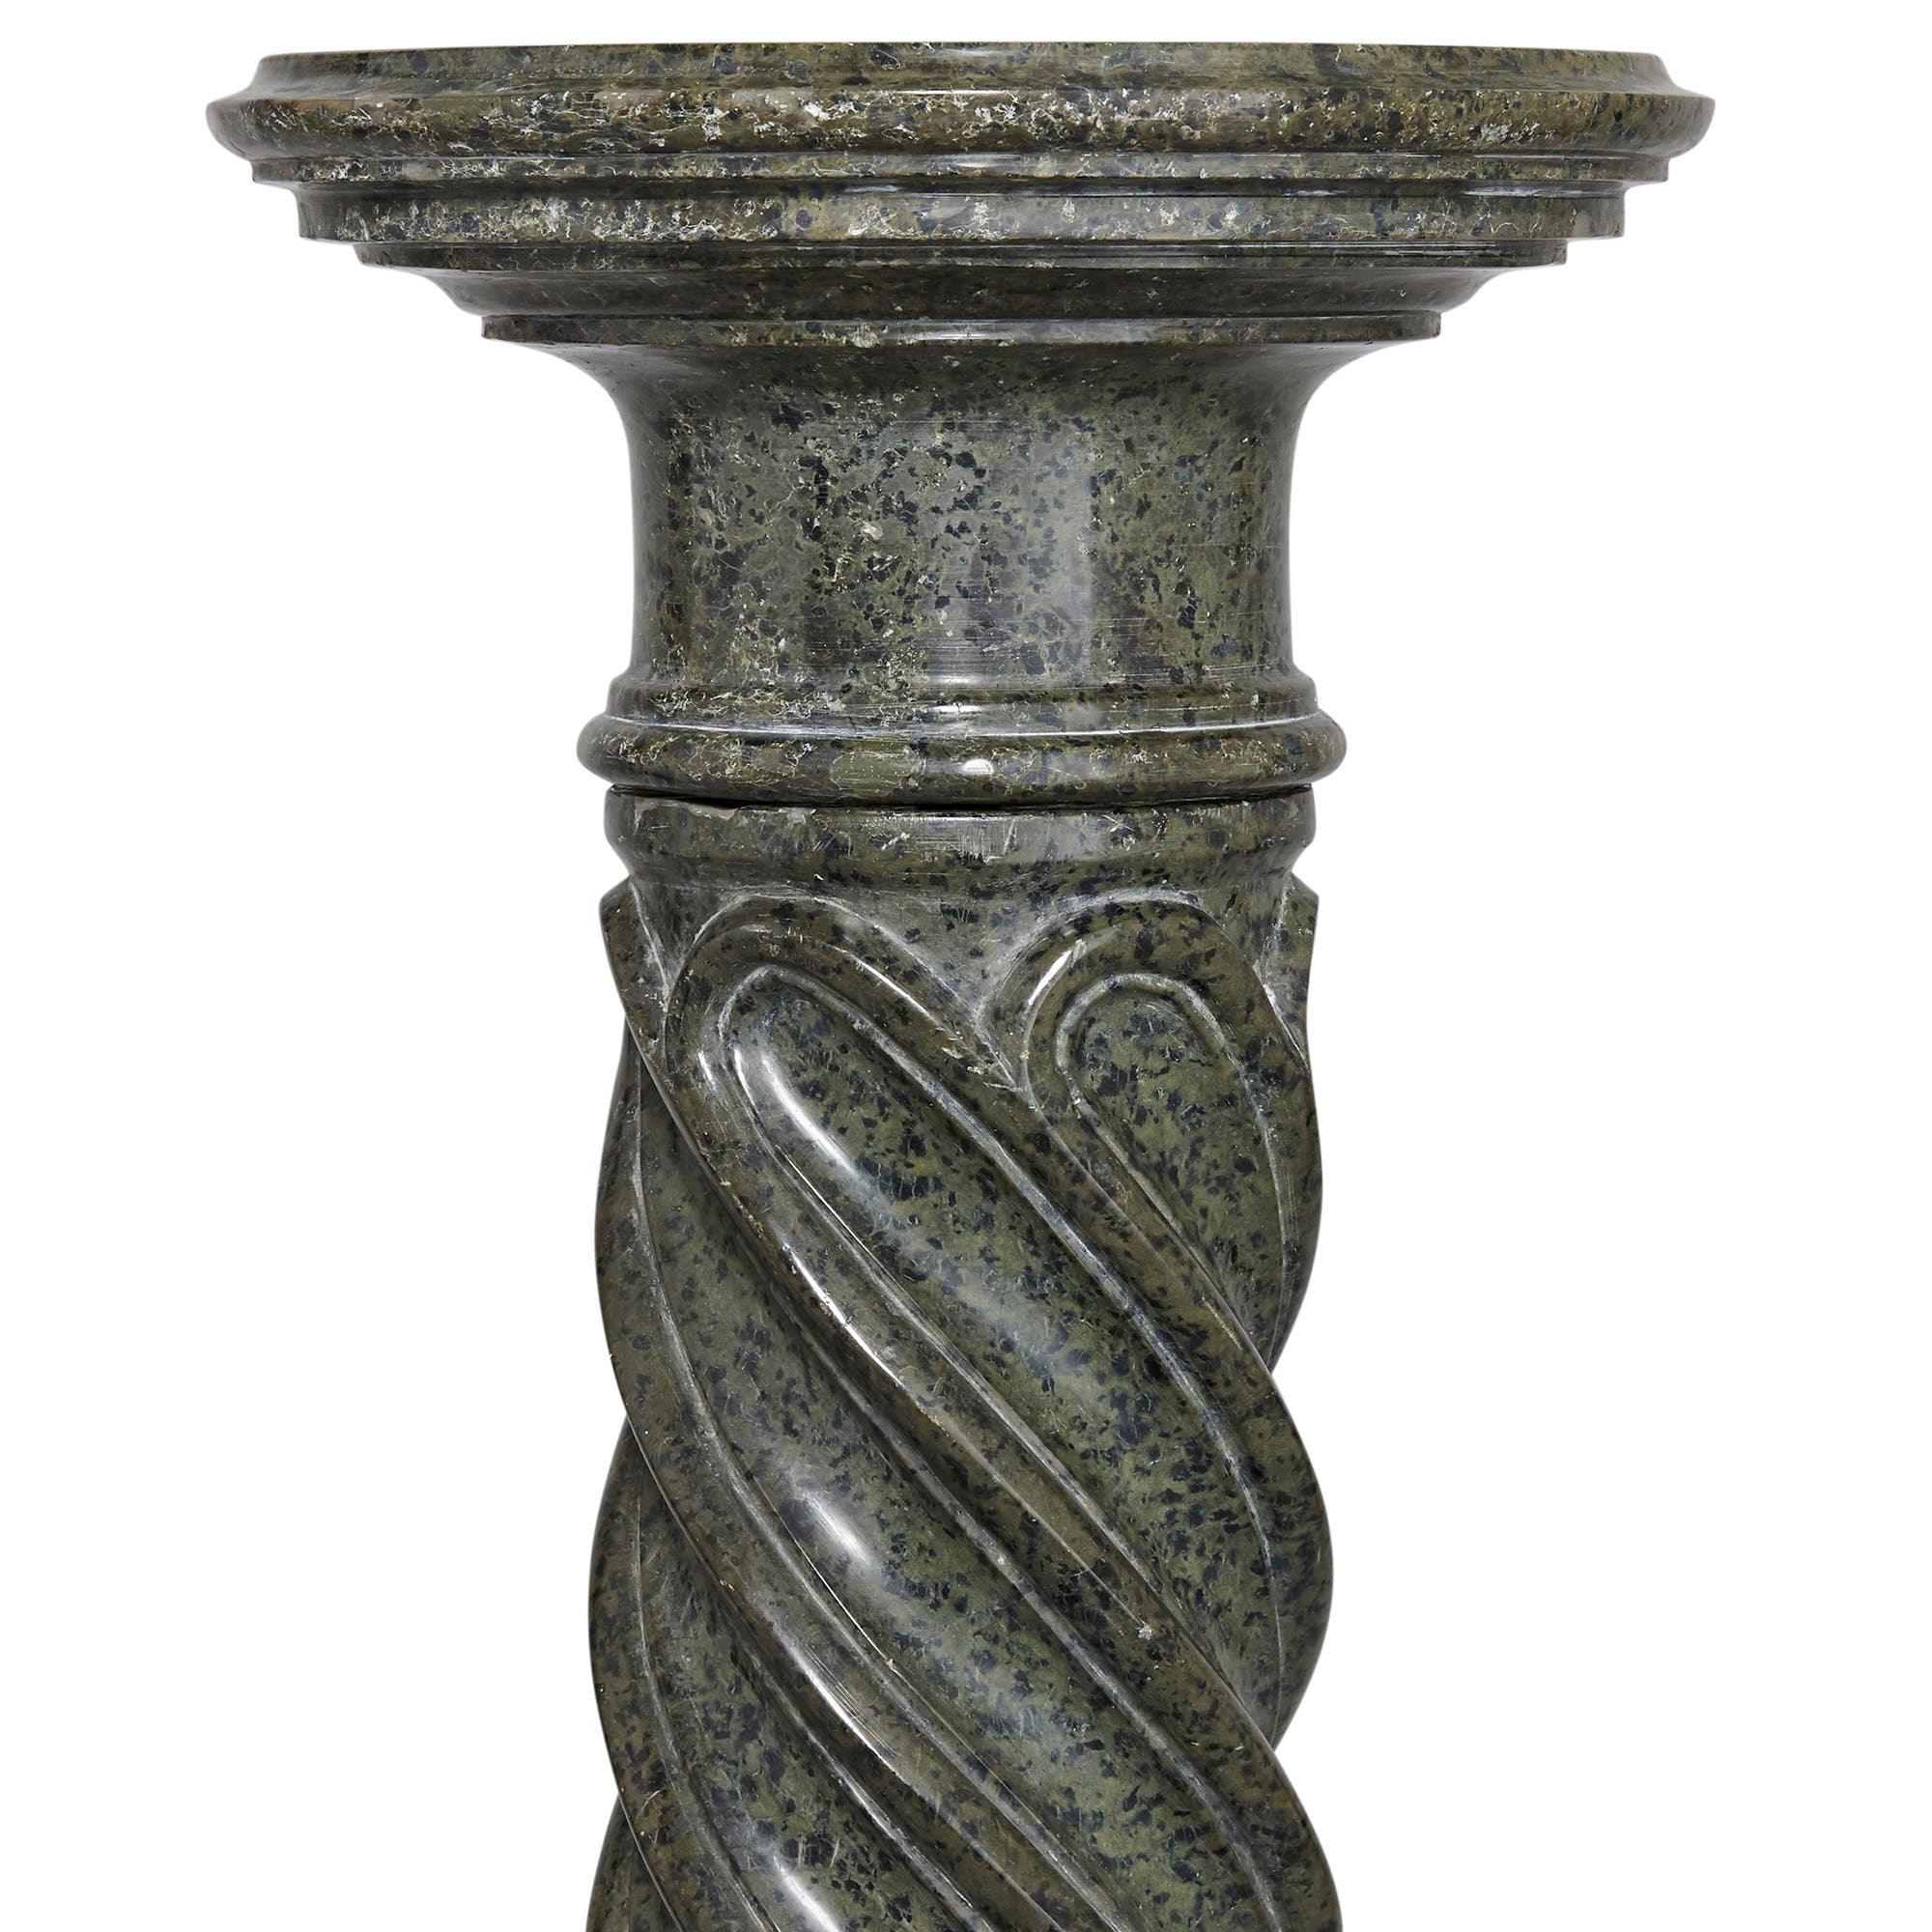 Neoclassical Solomonic green serpentine column
French, 19th century
Dimensions: Height 109cm, diameter 34cm

Of typical neoclassical form, this green serpentine marble Solomonic pedestal features an octagonal base with a twisted central column